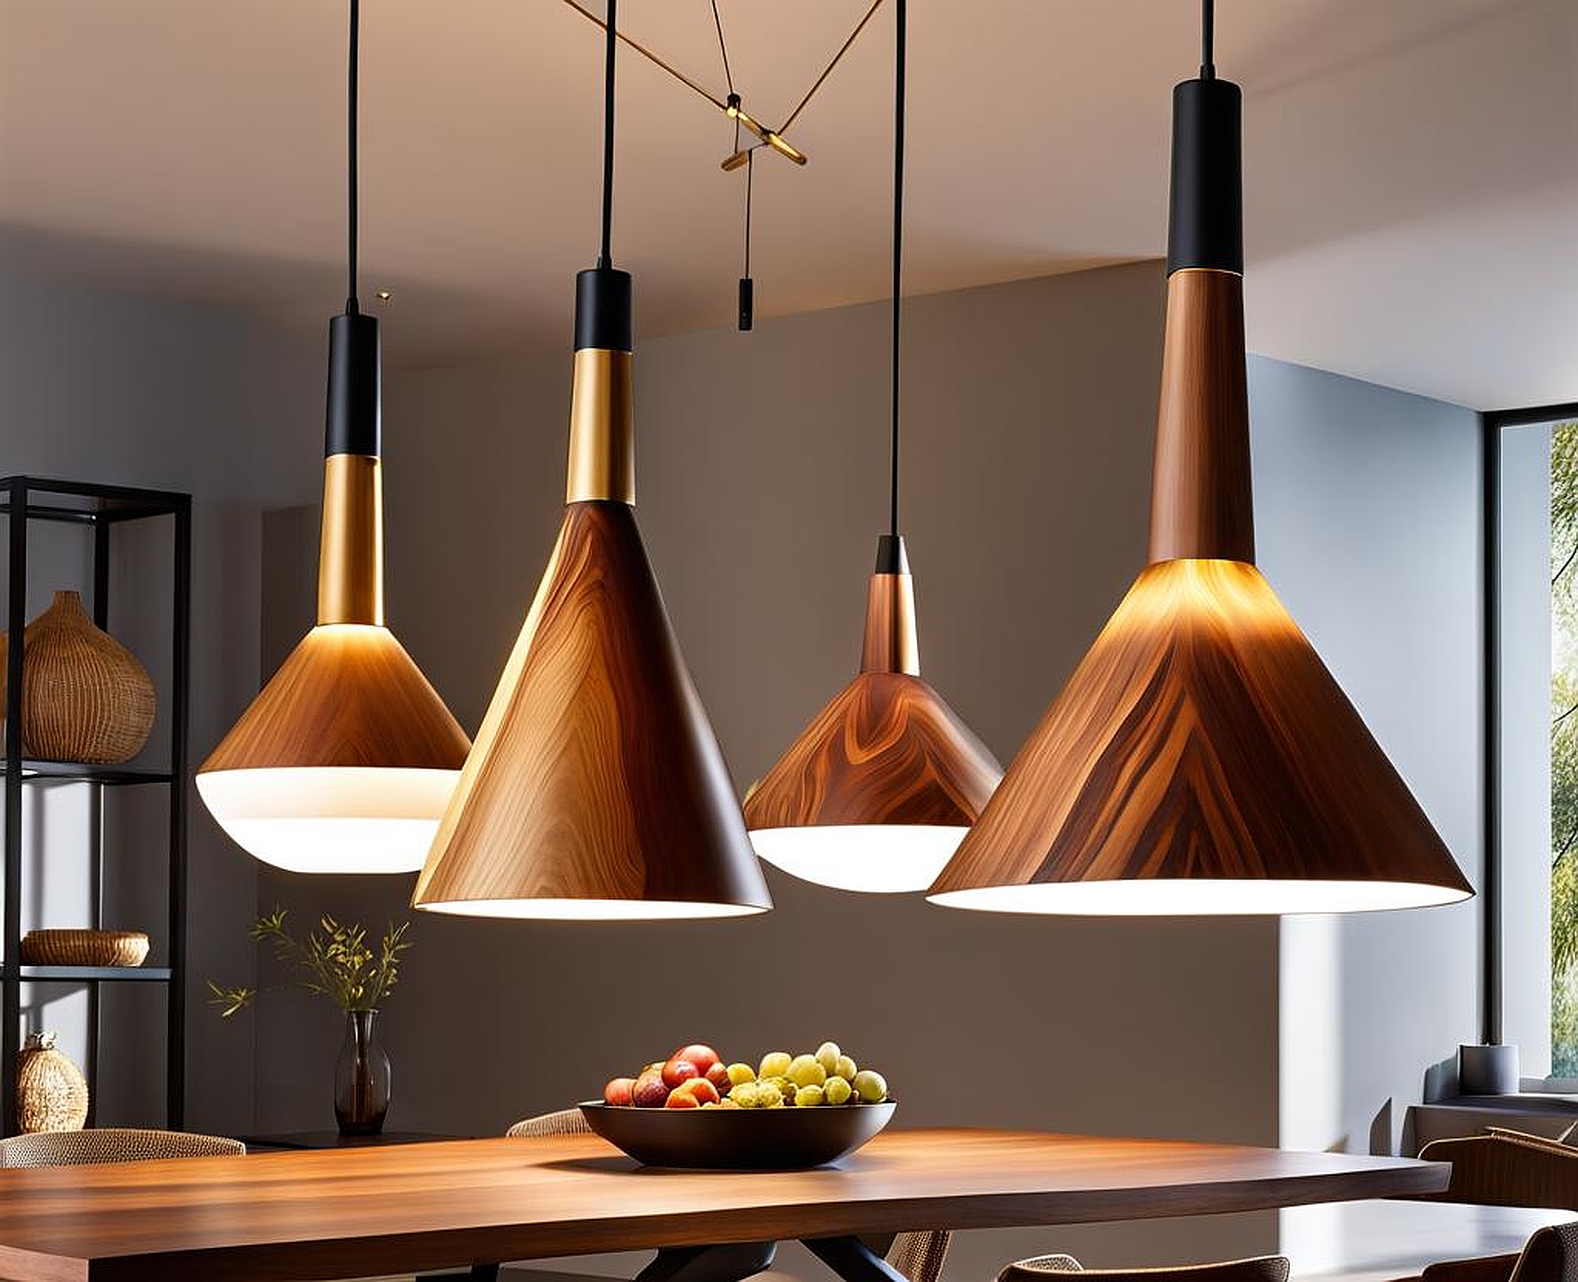 Unique Lighting Solutions with Pendant Lights and Wood Accents